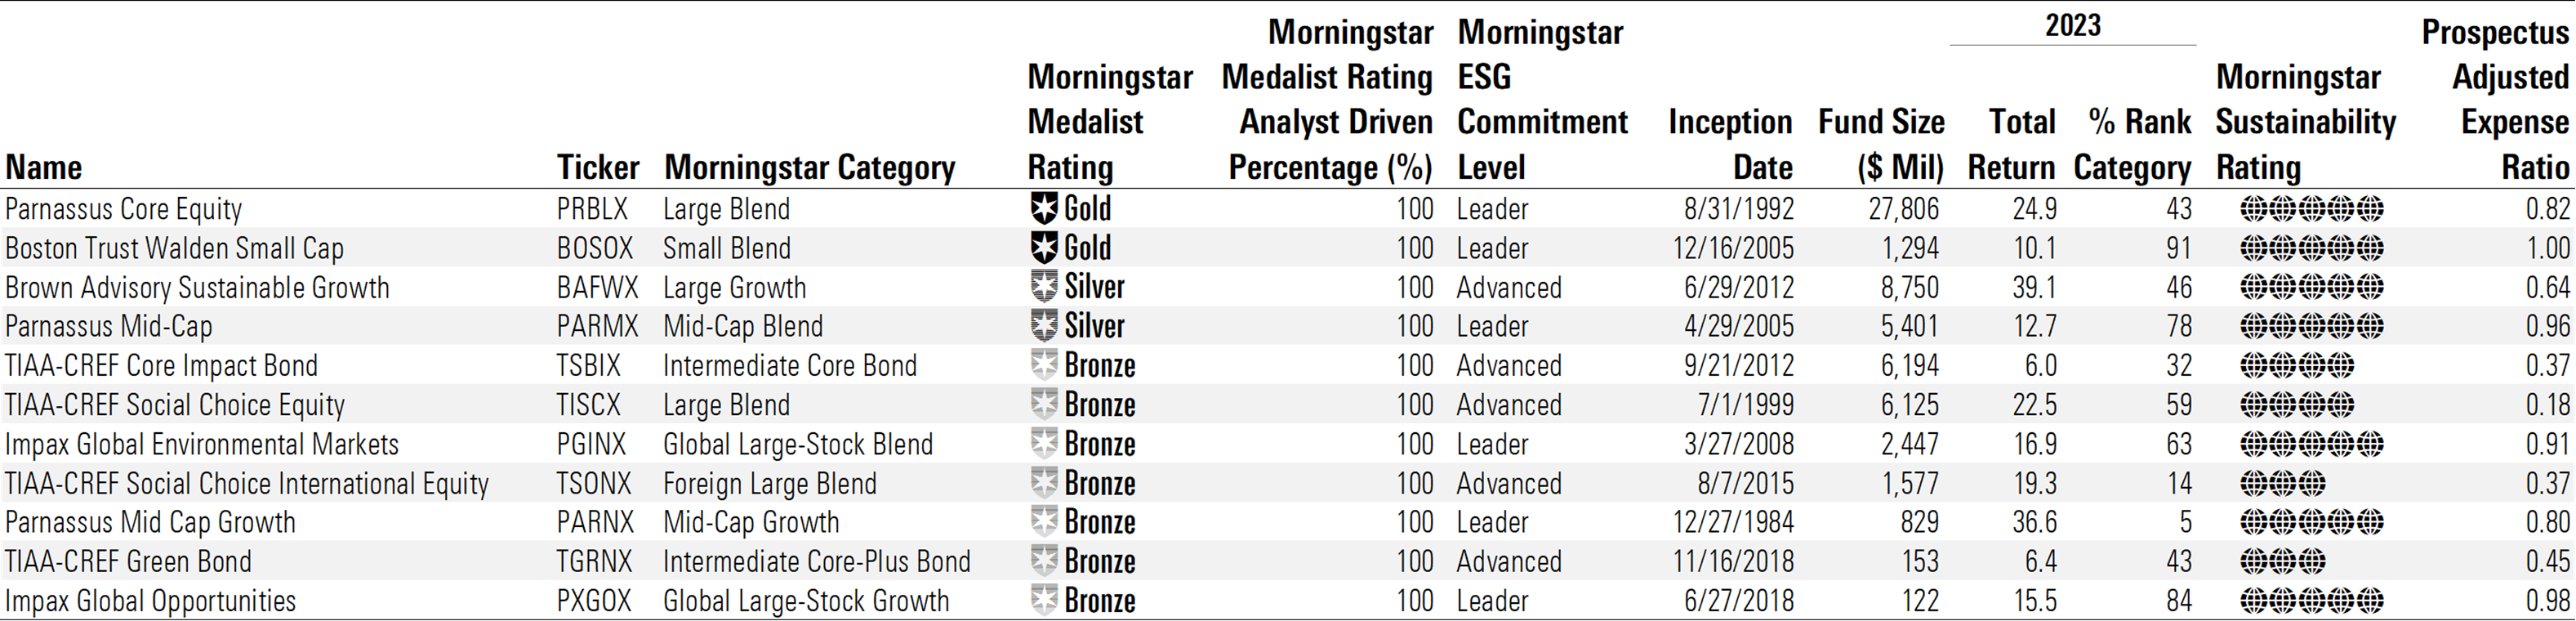 Eleven sustainable funds earn medals under the Morningstar Medalist Rating.